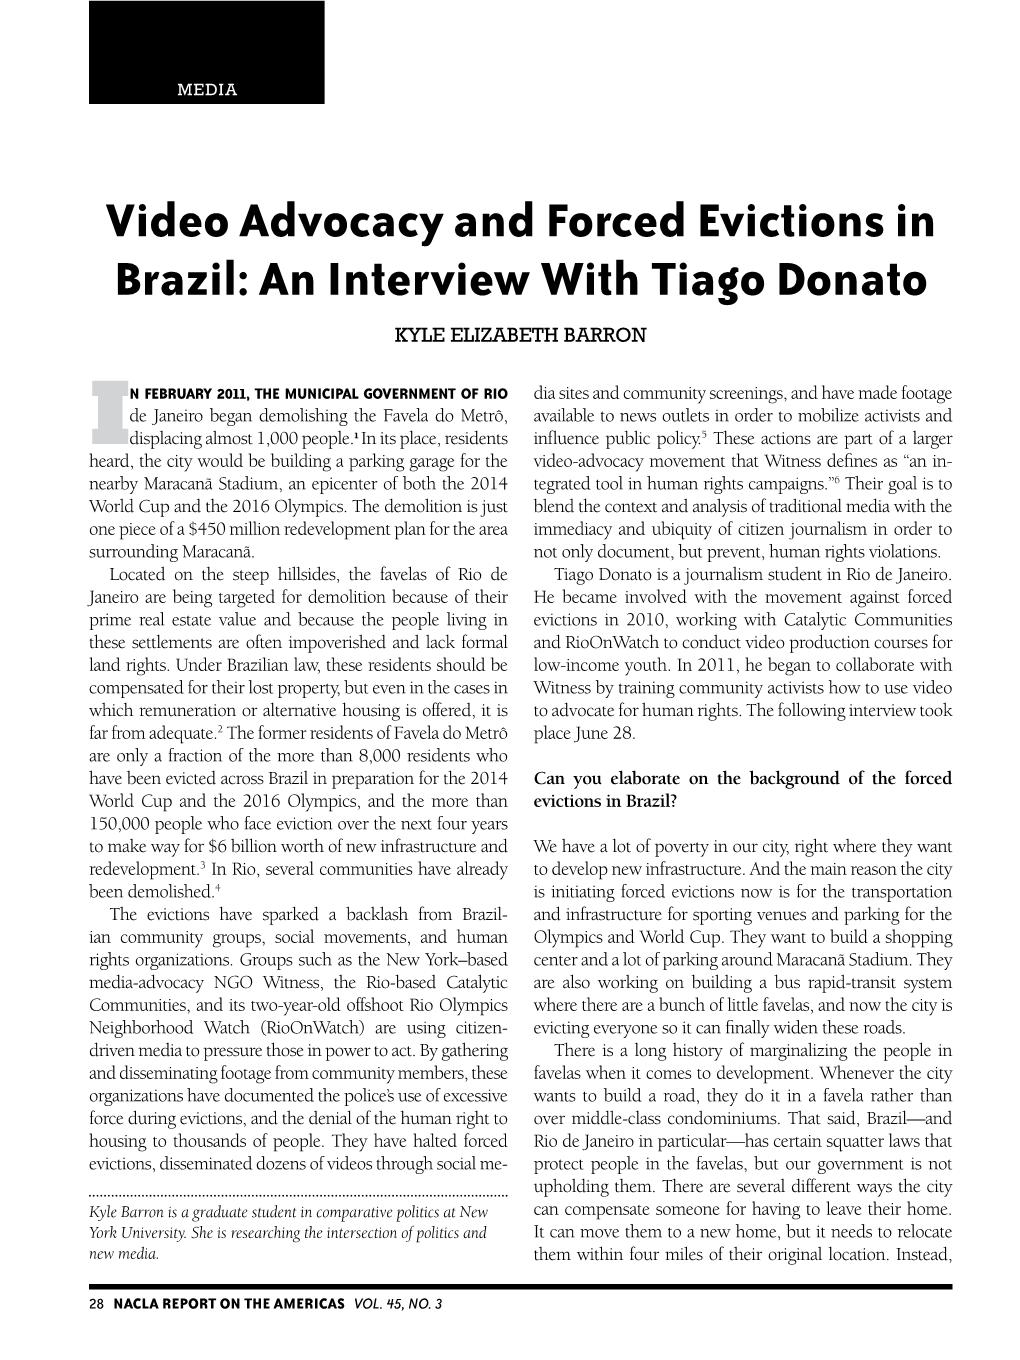 Video Advocacy and Forced Evictions in Brazil: an Interview with Tiago Donato Kyle Elizabeth Barron